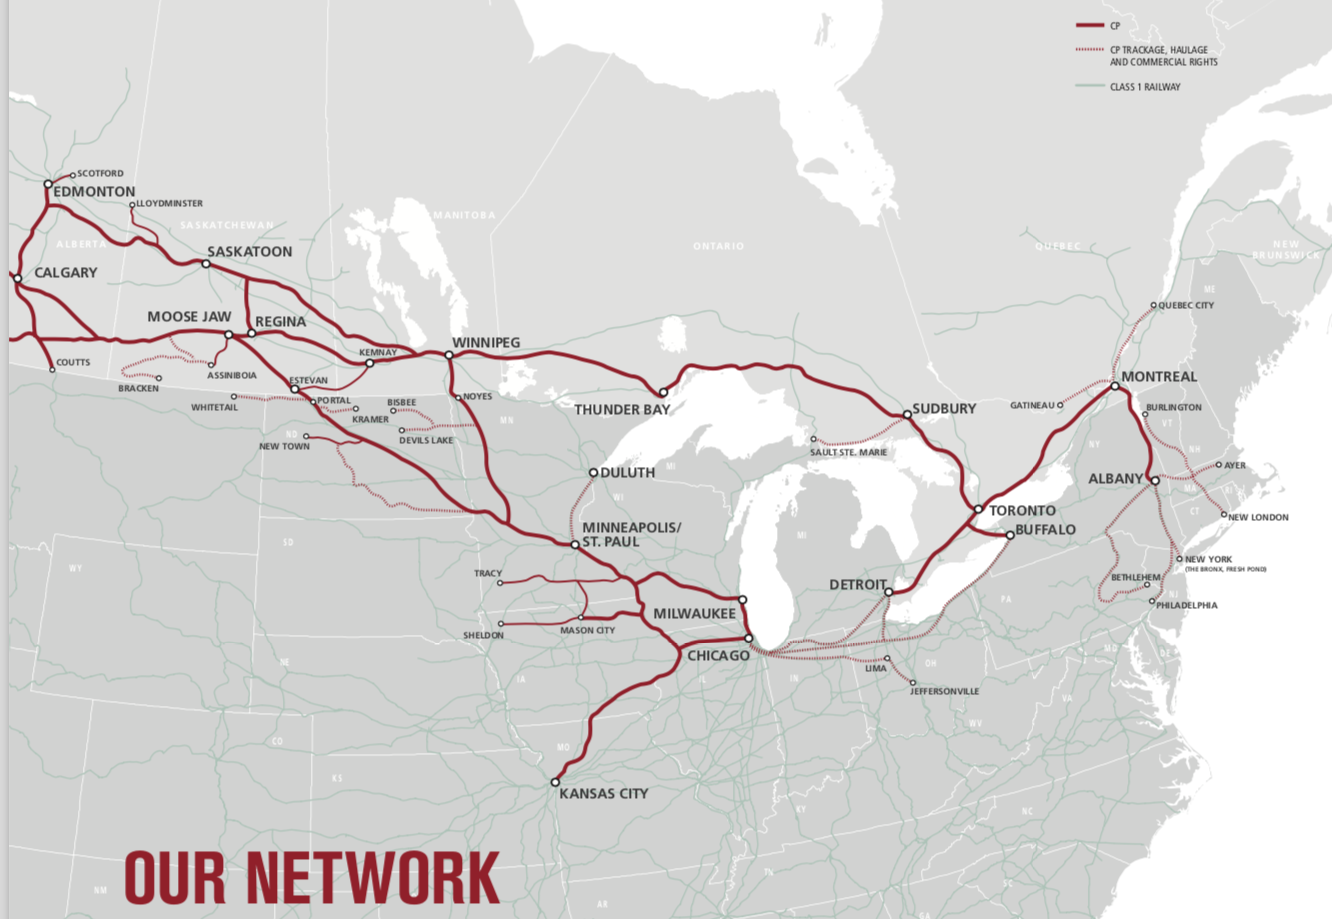 canadian pacific railway map 2018 Should You Buy Canadian Pacific Railway And Its Strong Growth canadian pacific railway map 2018